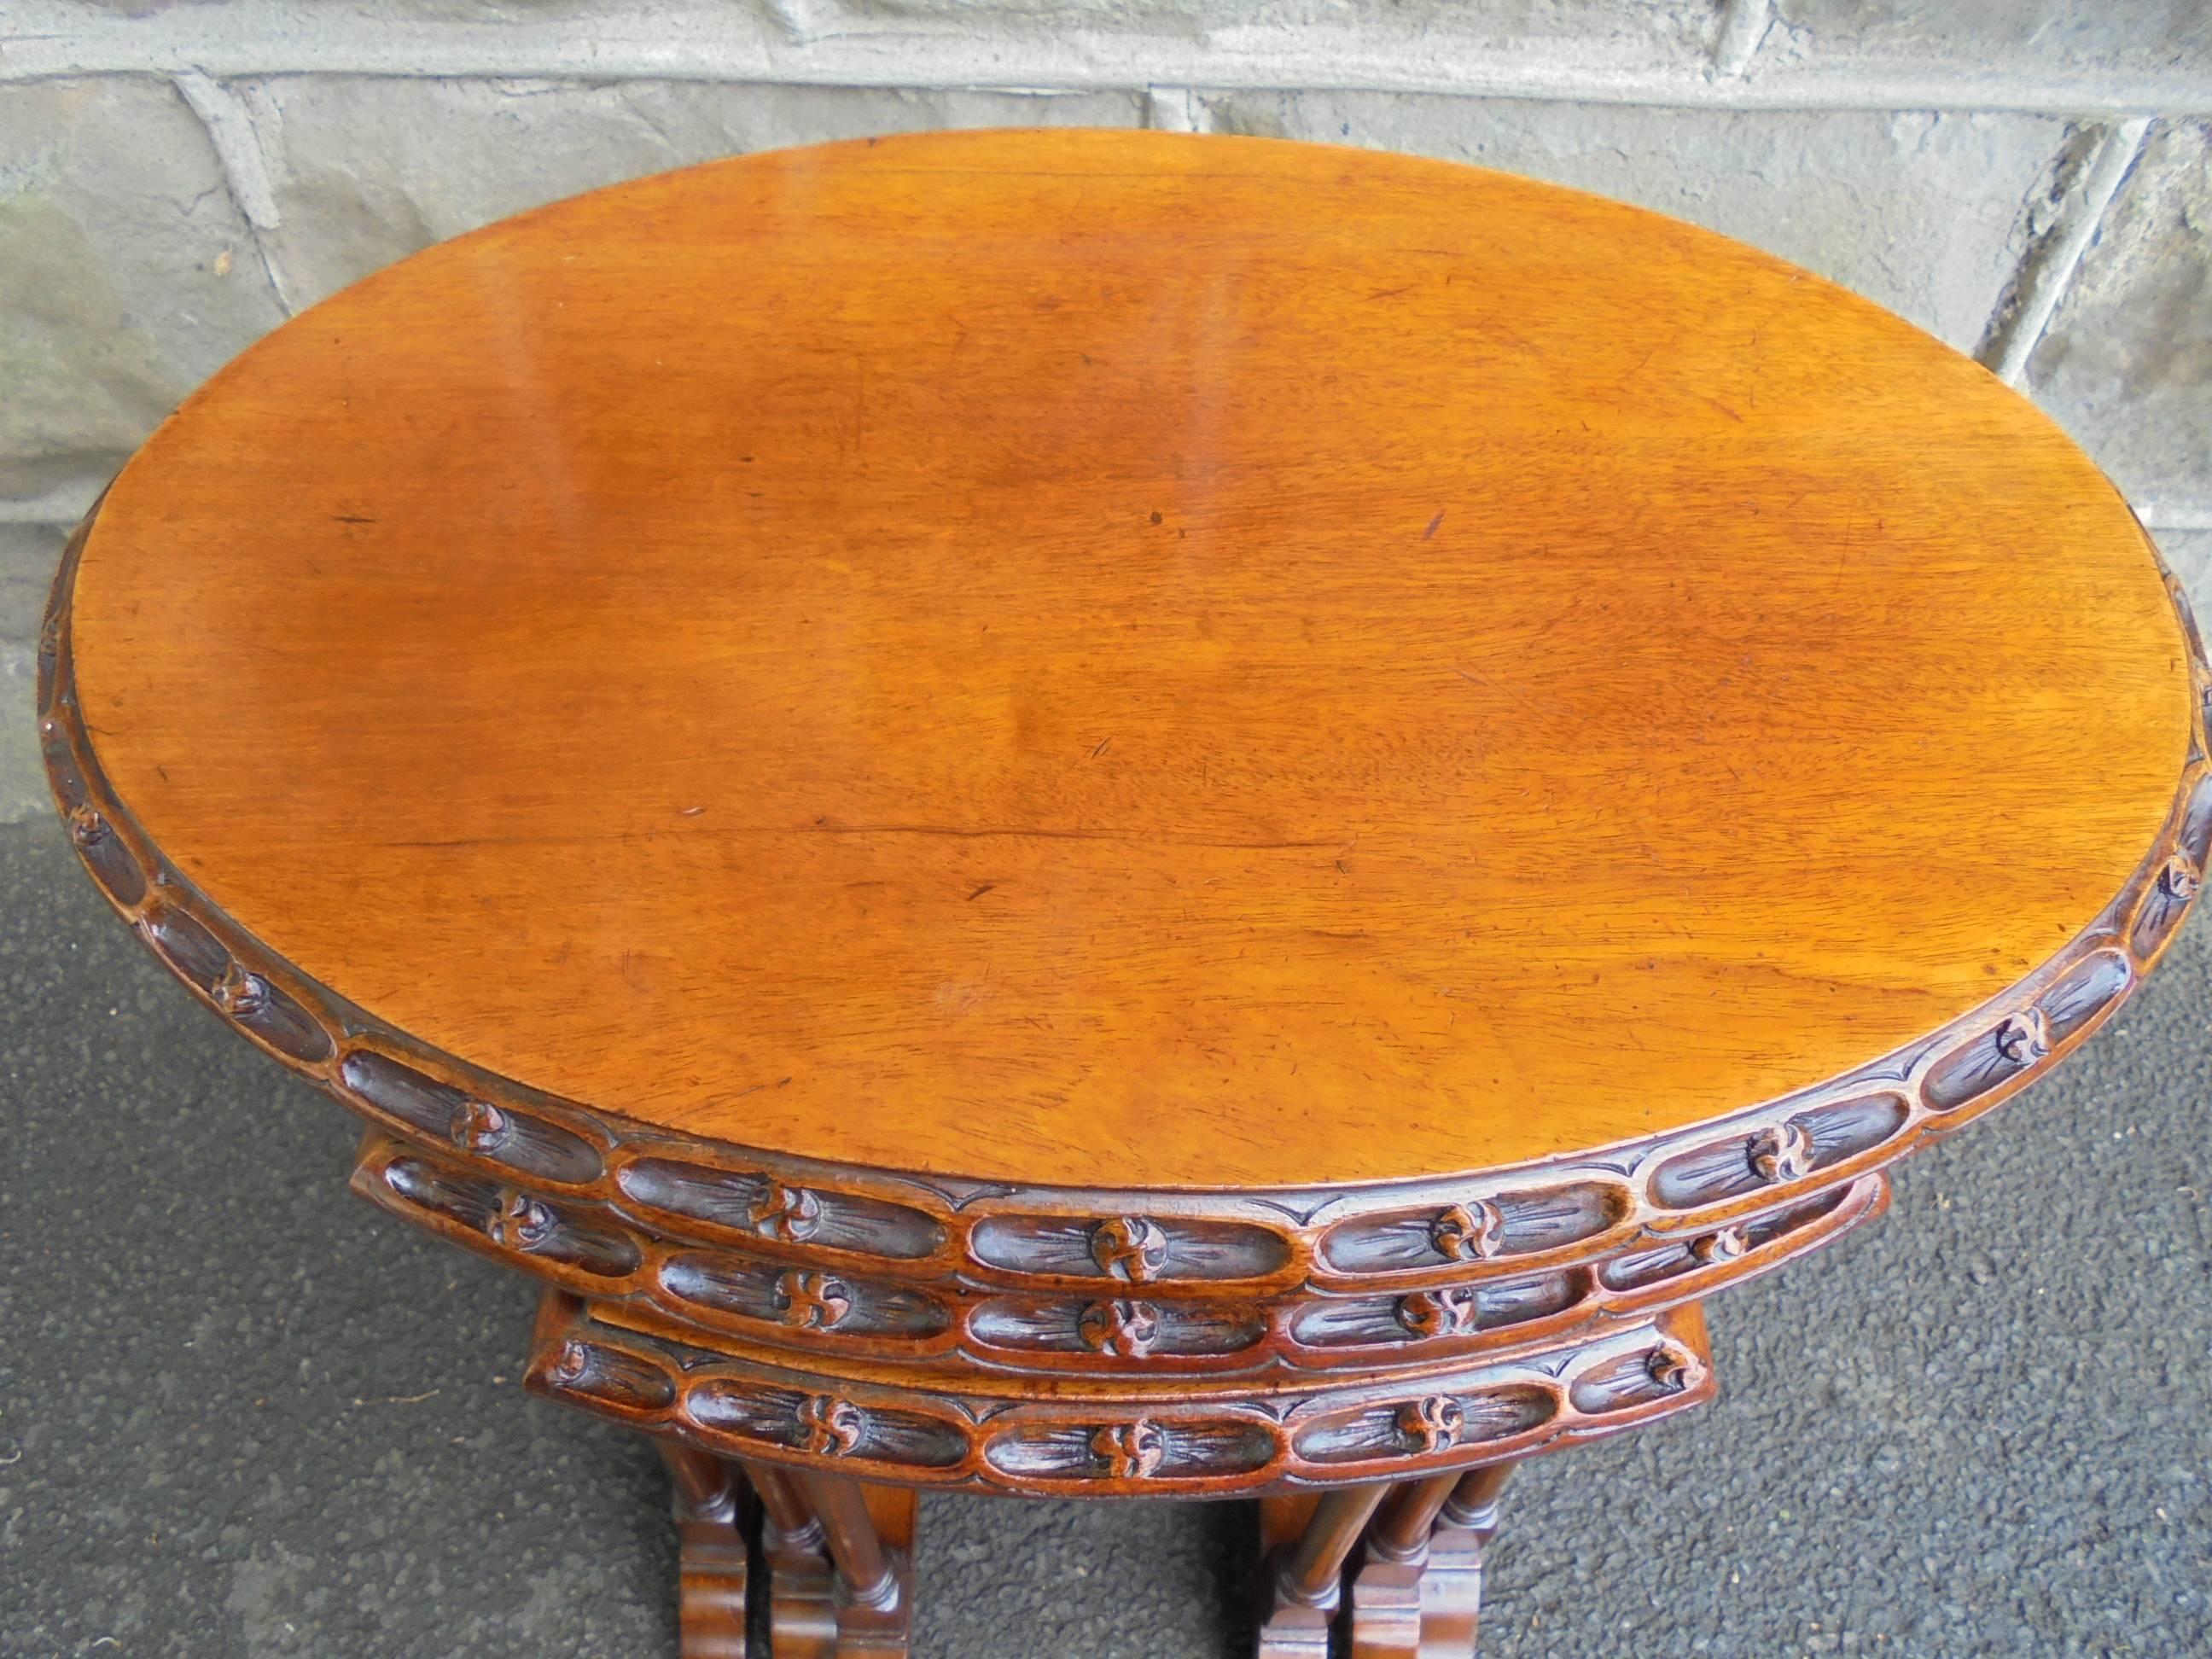 Offered for sale is this antique nest three mahogany tables

Oval solid mahogany top with carved decoration to the front & back edges of each table. Standing on twin turned pedestal supports with shaped feet. The smaller tables slide under each